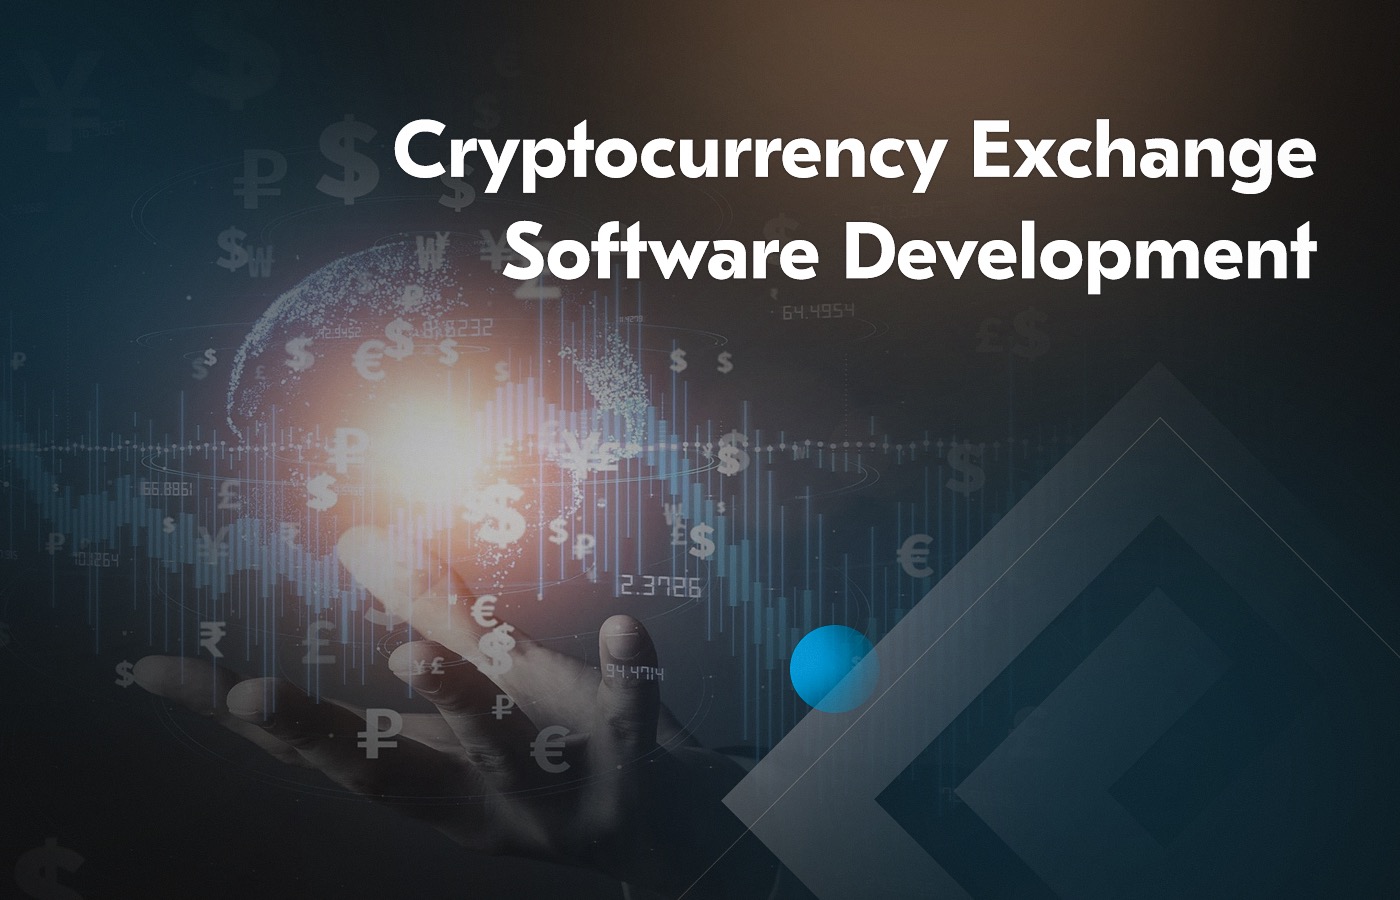 Cryptocurrency exchange software